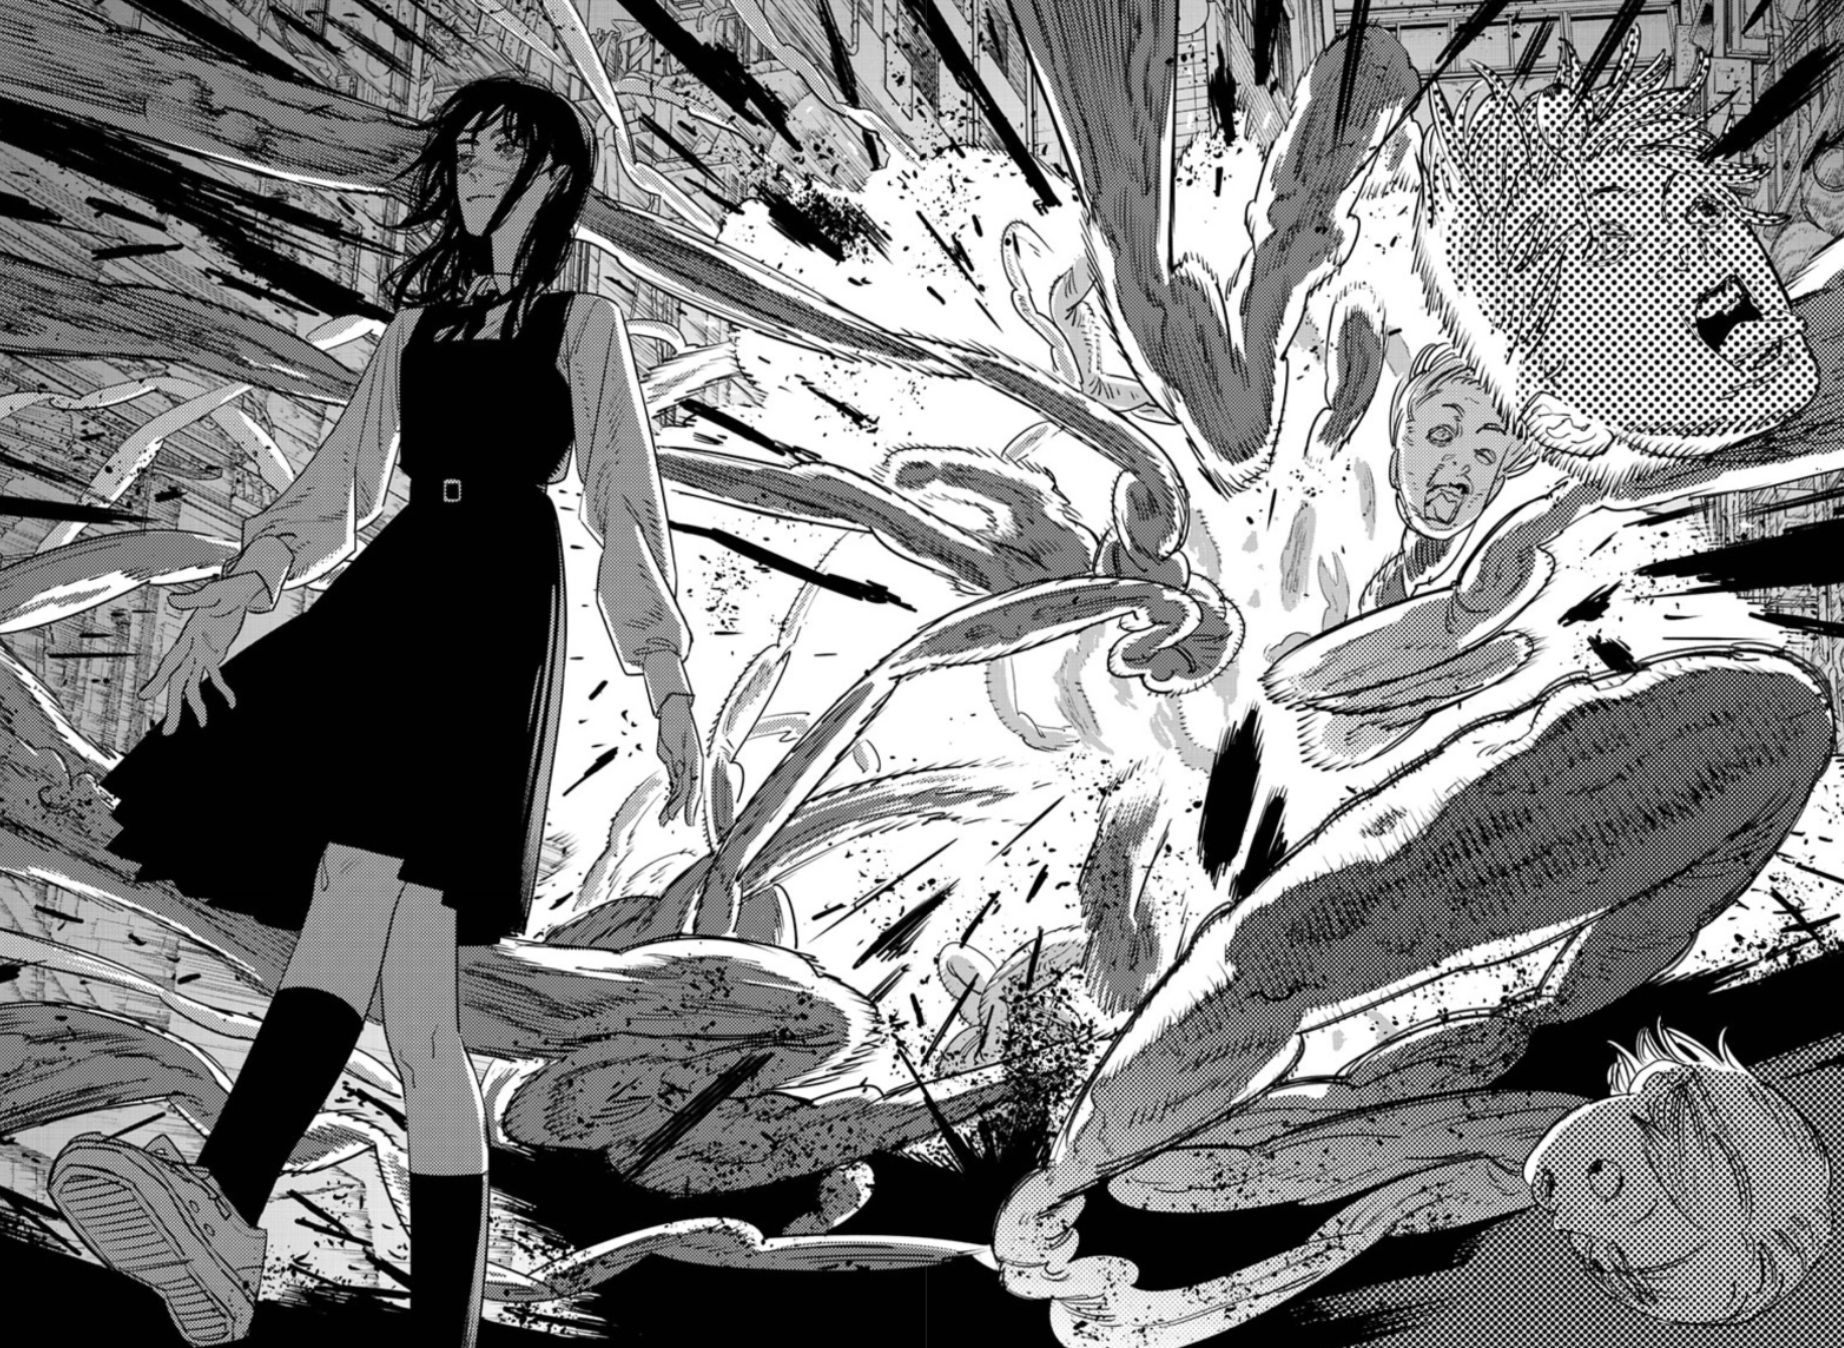 Chainsaw Man Part 2 Returns With a Bloody Vengeance – And a Headless Chicken